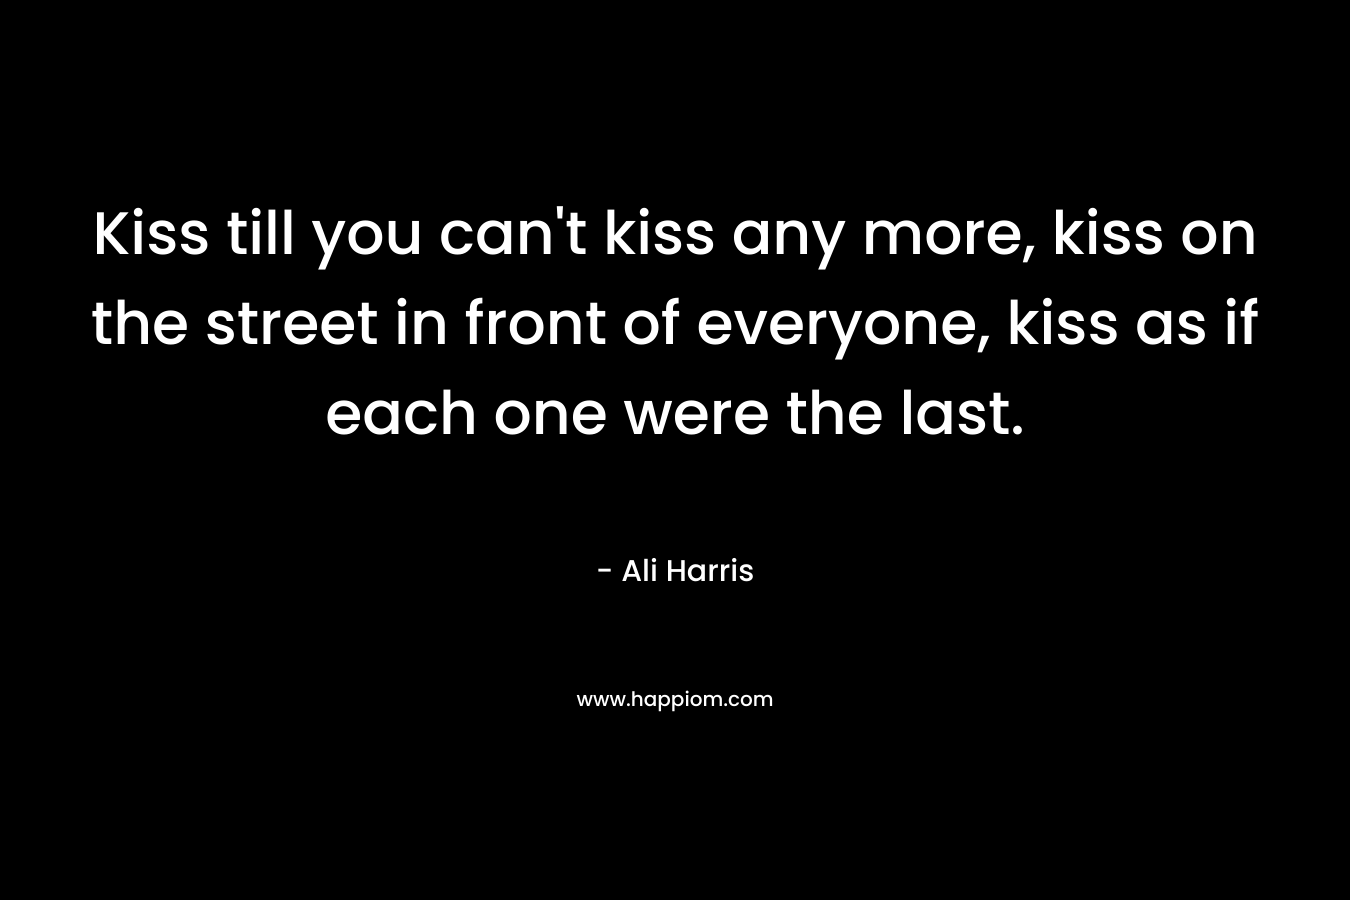 Kiss till you can't kiss any more, kiss on the street in front of everyone, kiss as if each one were the last.